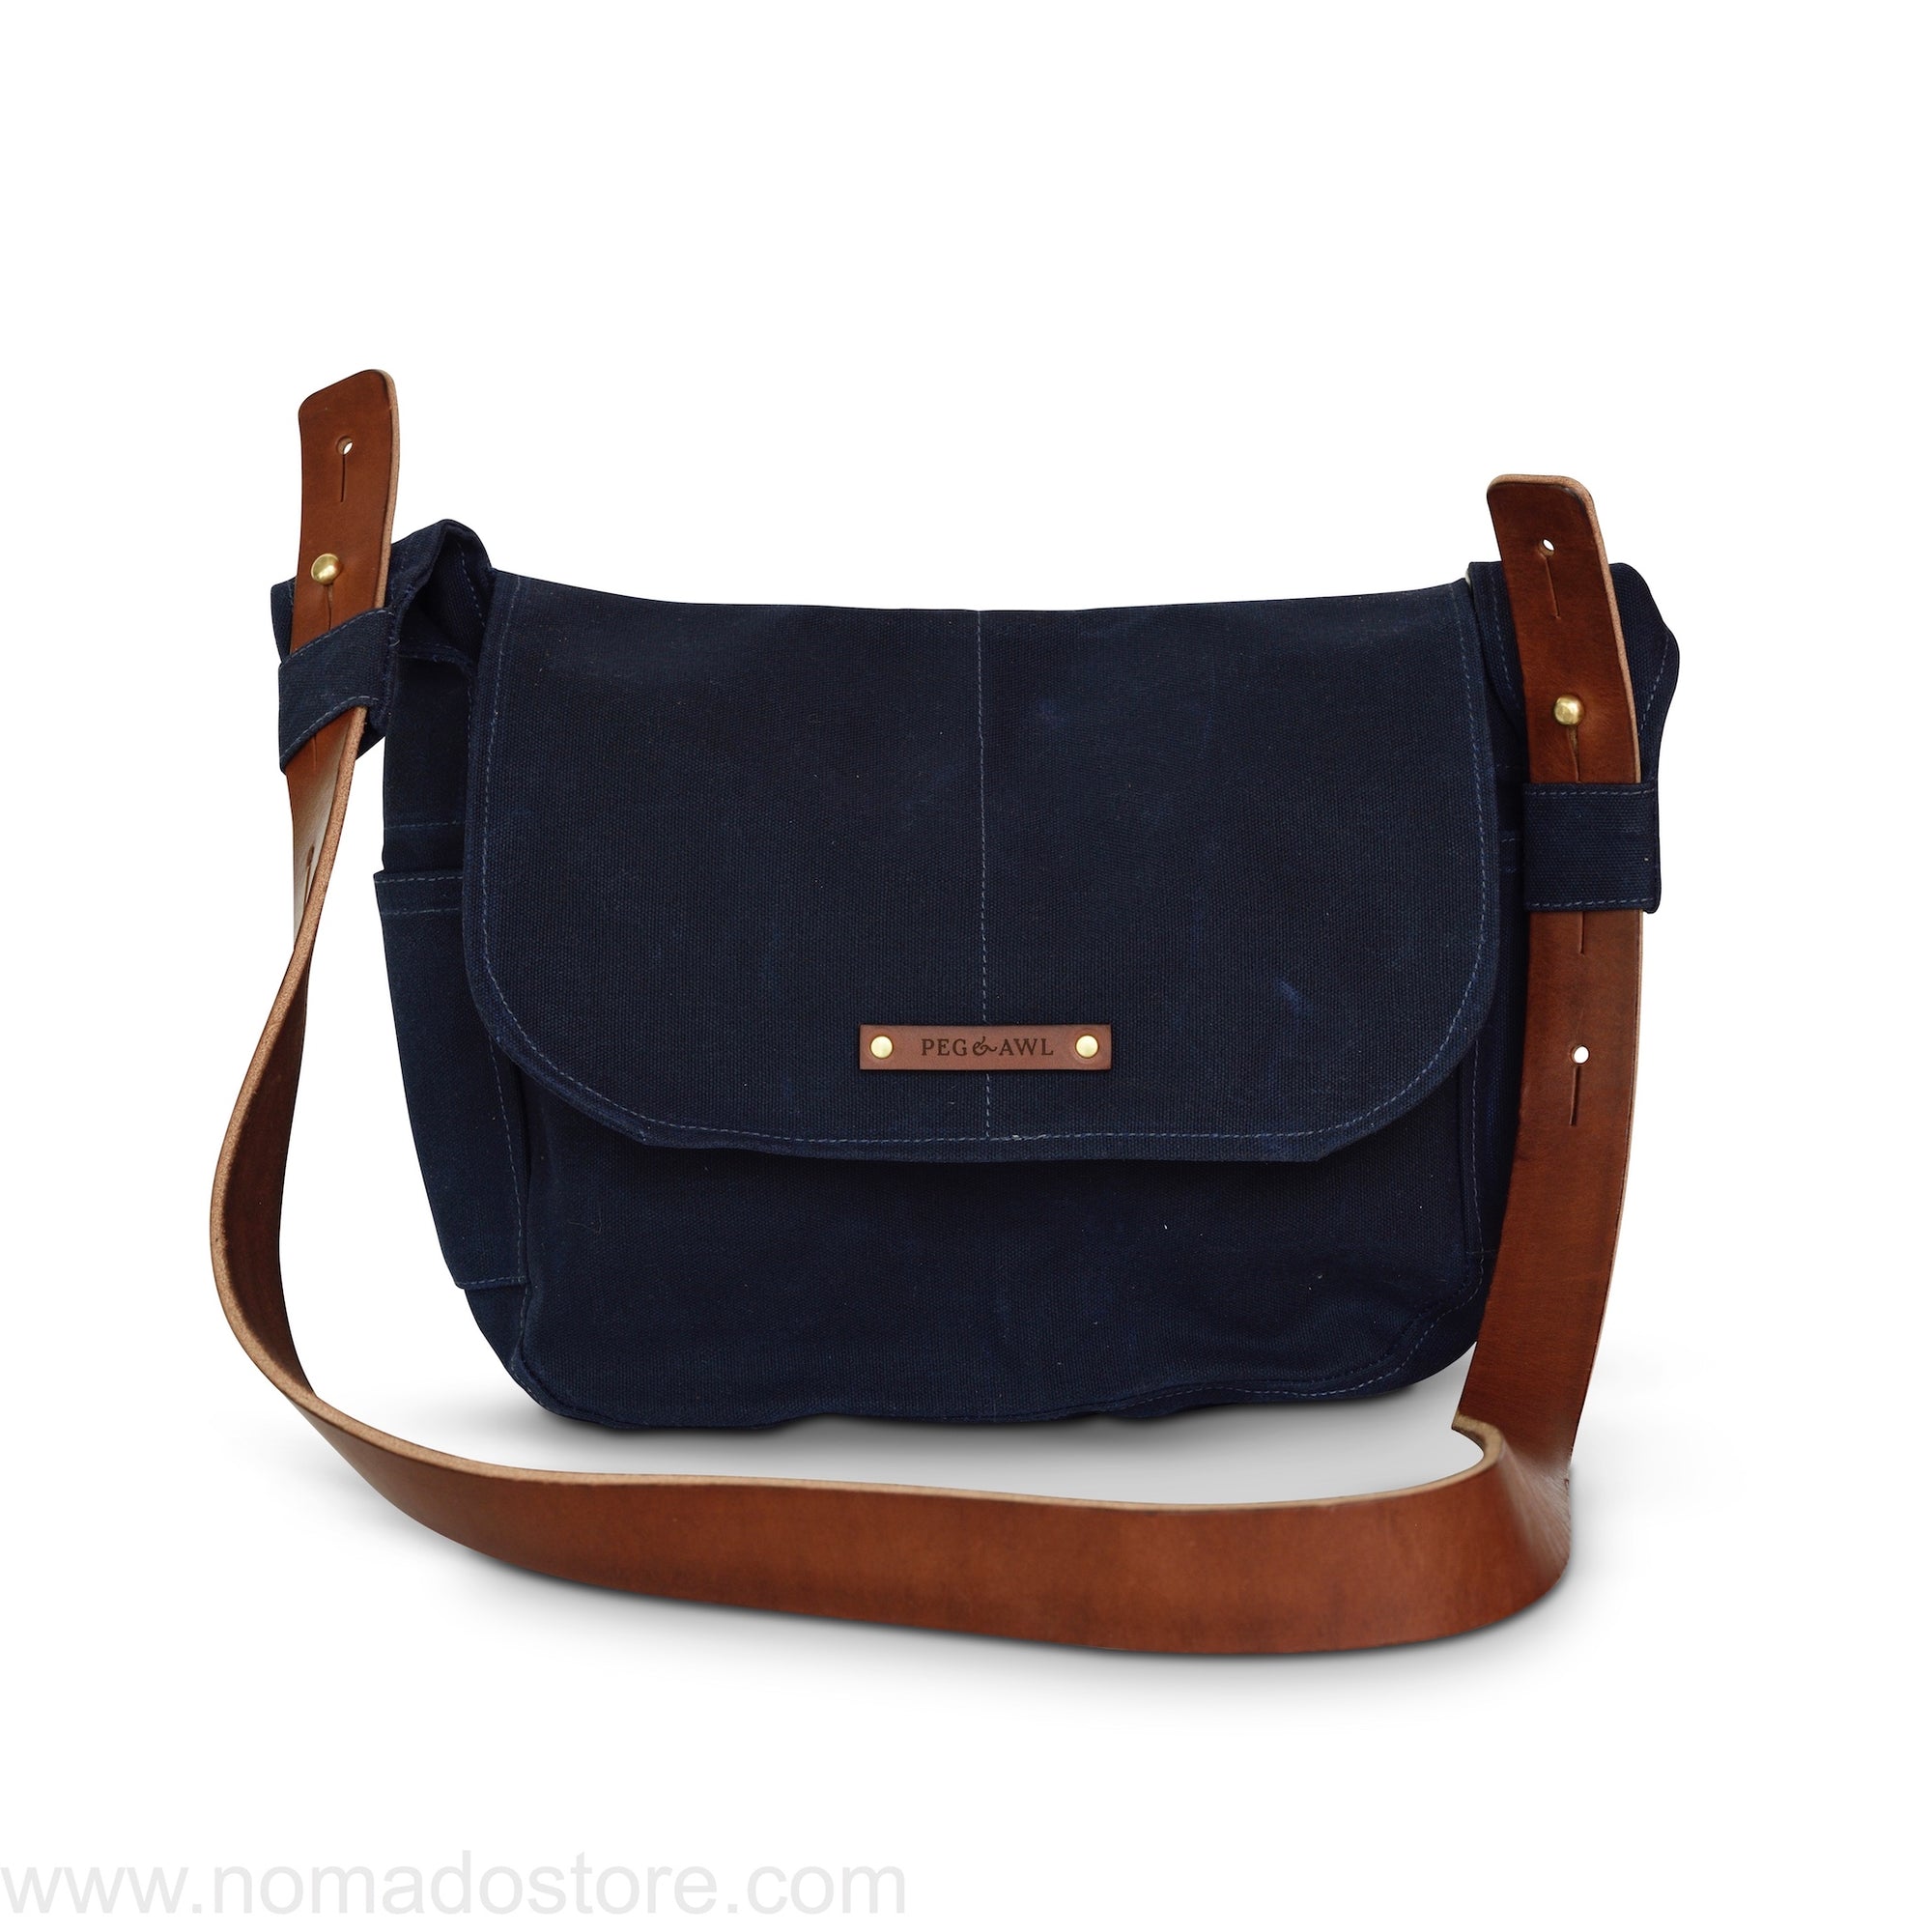 Peg and Awl The Finch Satchel - Rook - NOMADO Store 